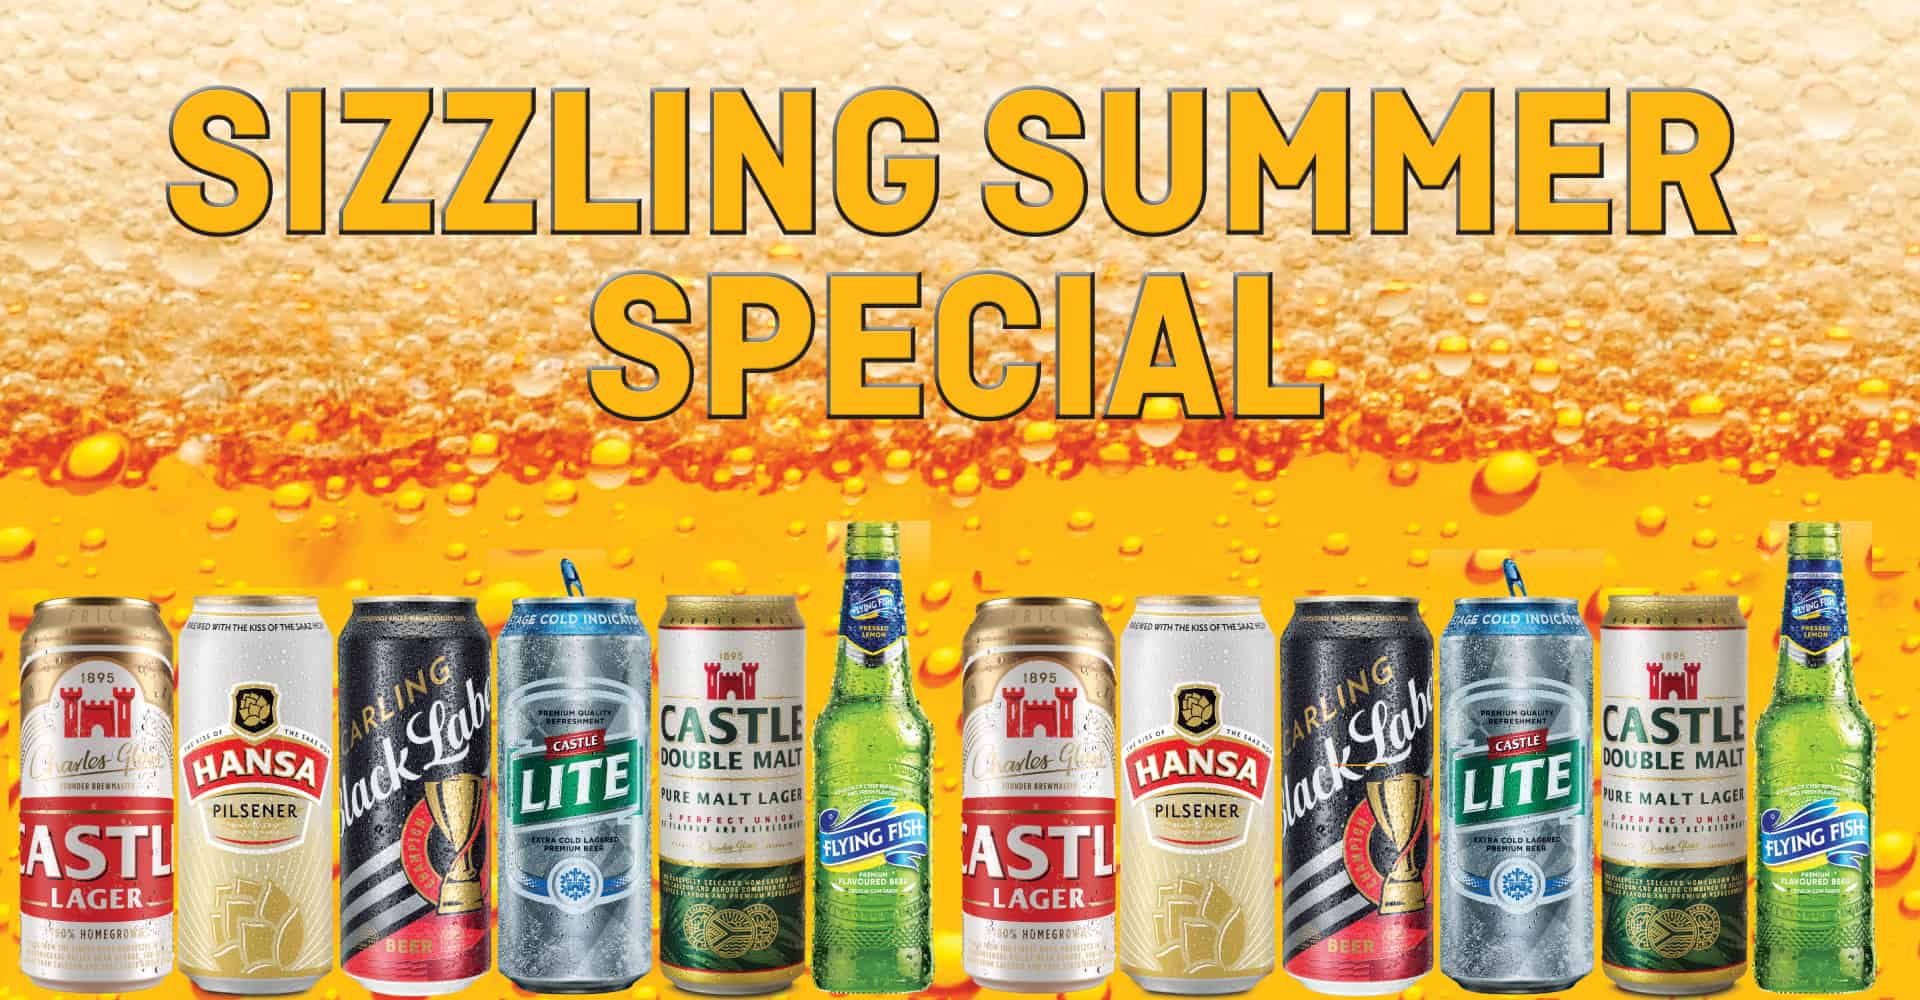 SAB Sizzling Summer Special The Caledon